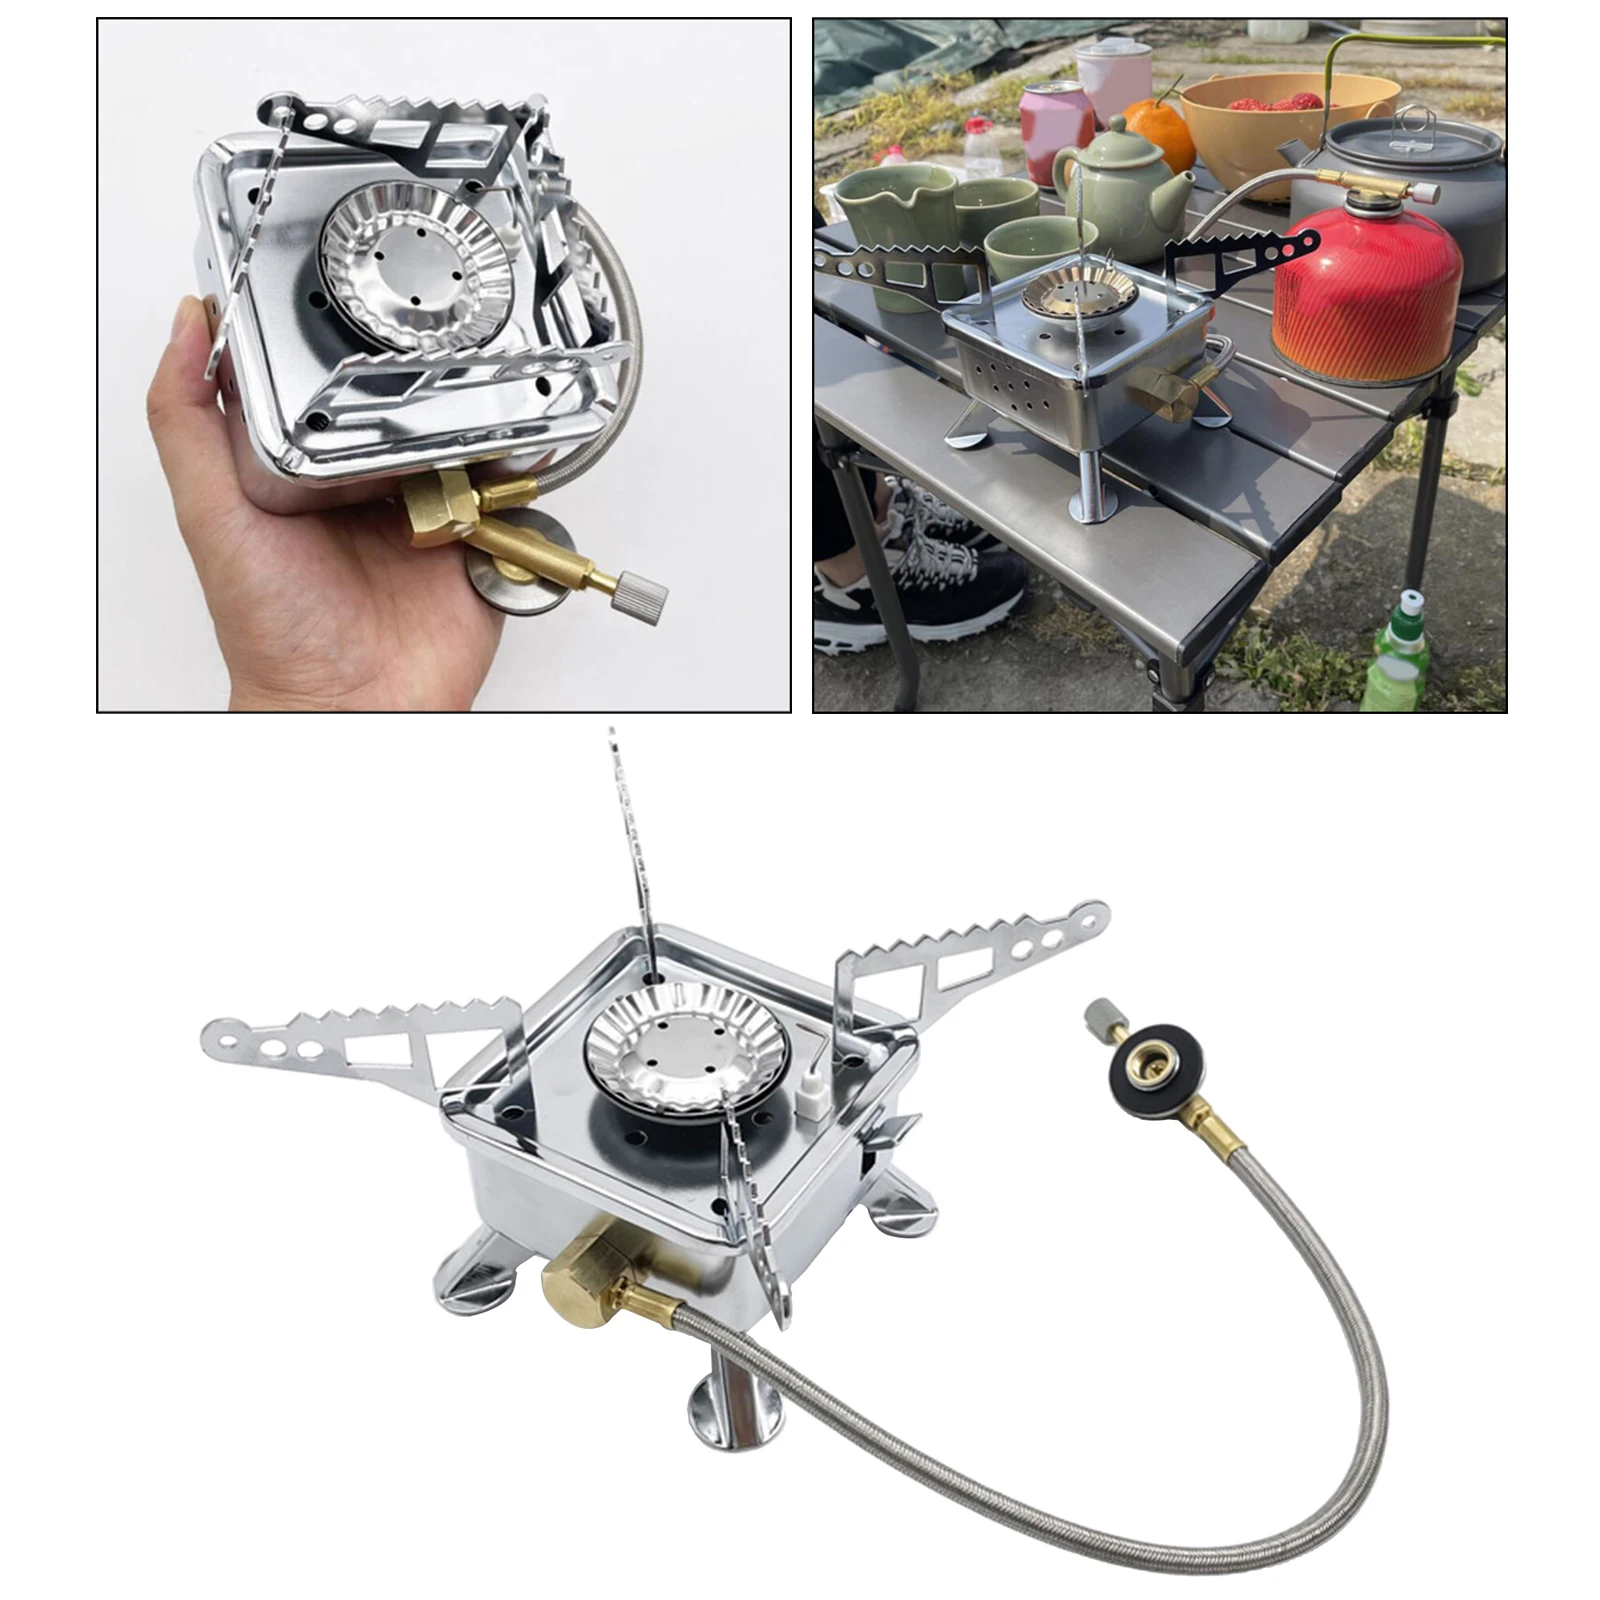 3500W Camping Gas Stove with Piezo Ignition Outdoor Backpacking Butane Burner Cooking Hiking Picnic Grill MAPP Tank Stoves